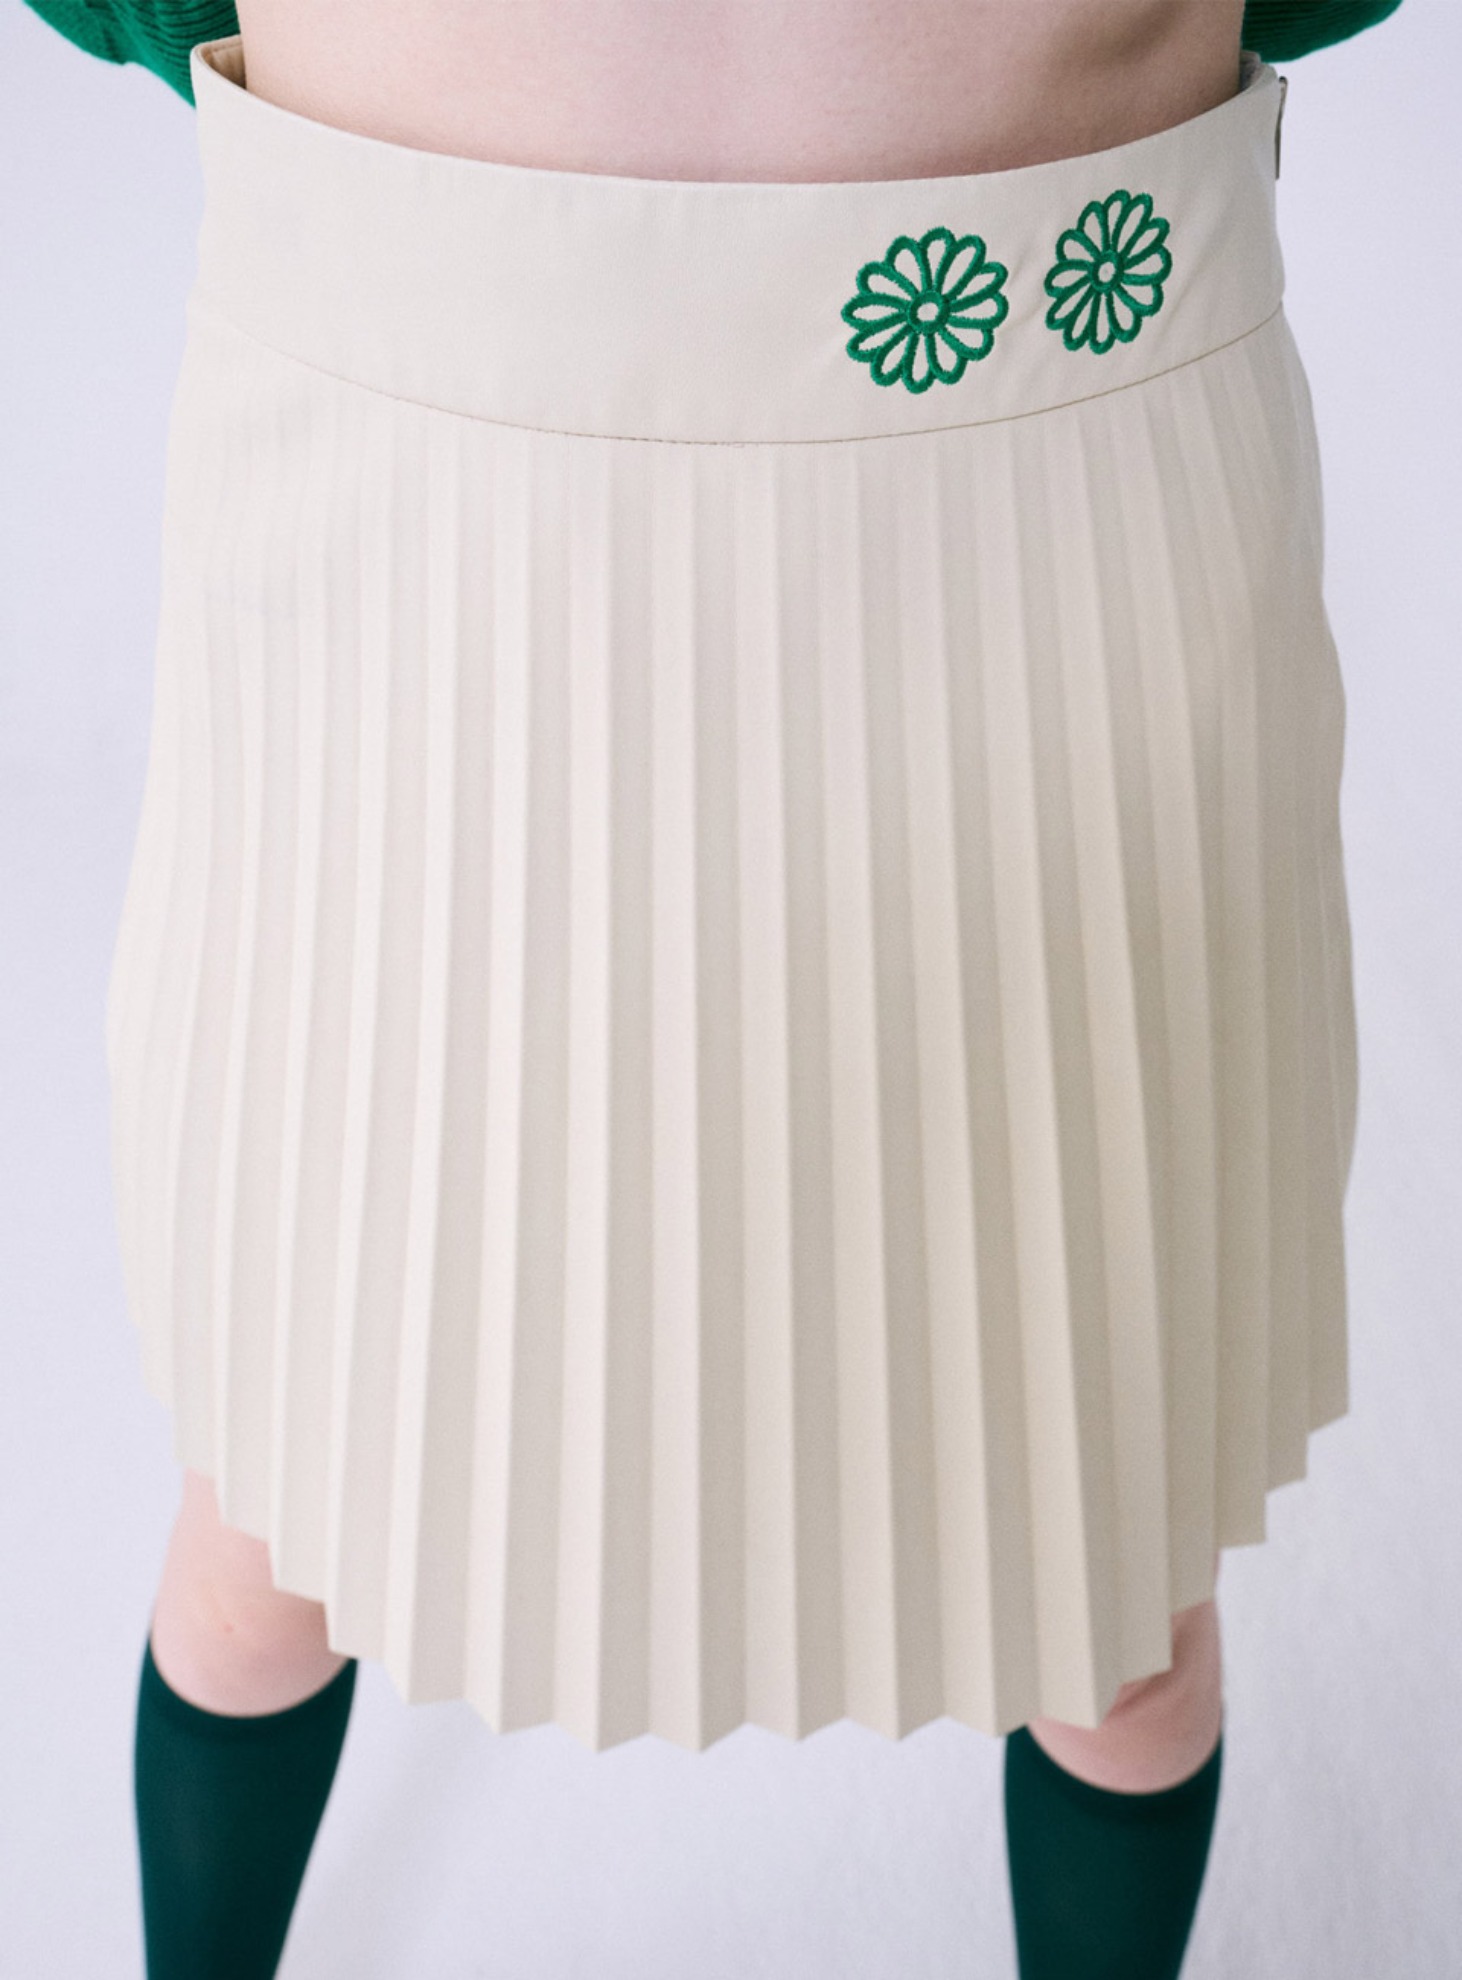 FAUX LEATHER ACCORDIAN PLEATS SKIRT_IVORY GREEN